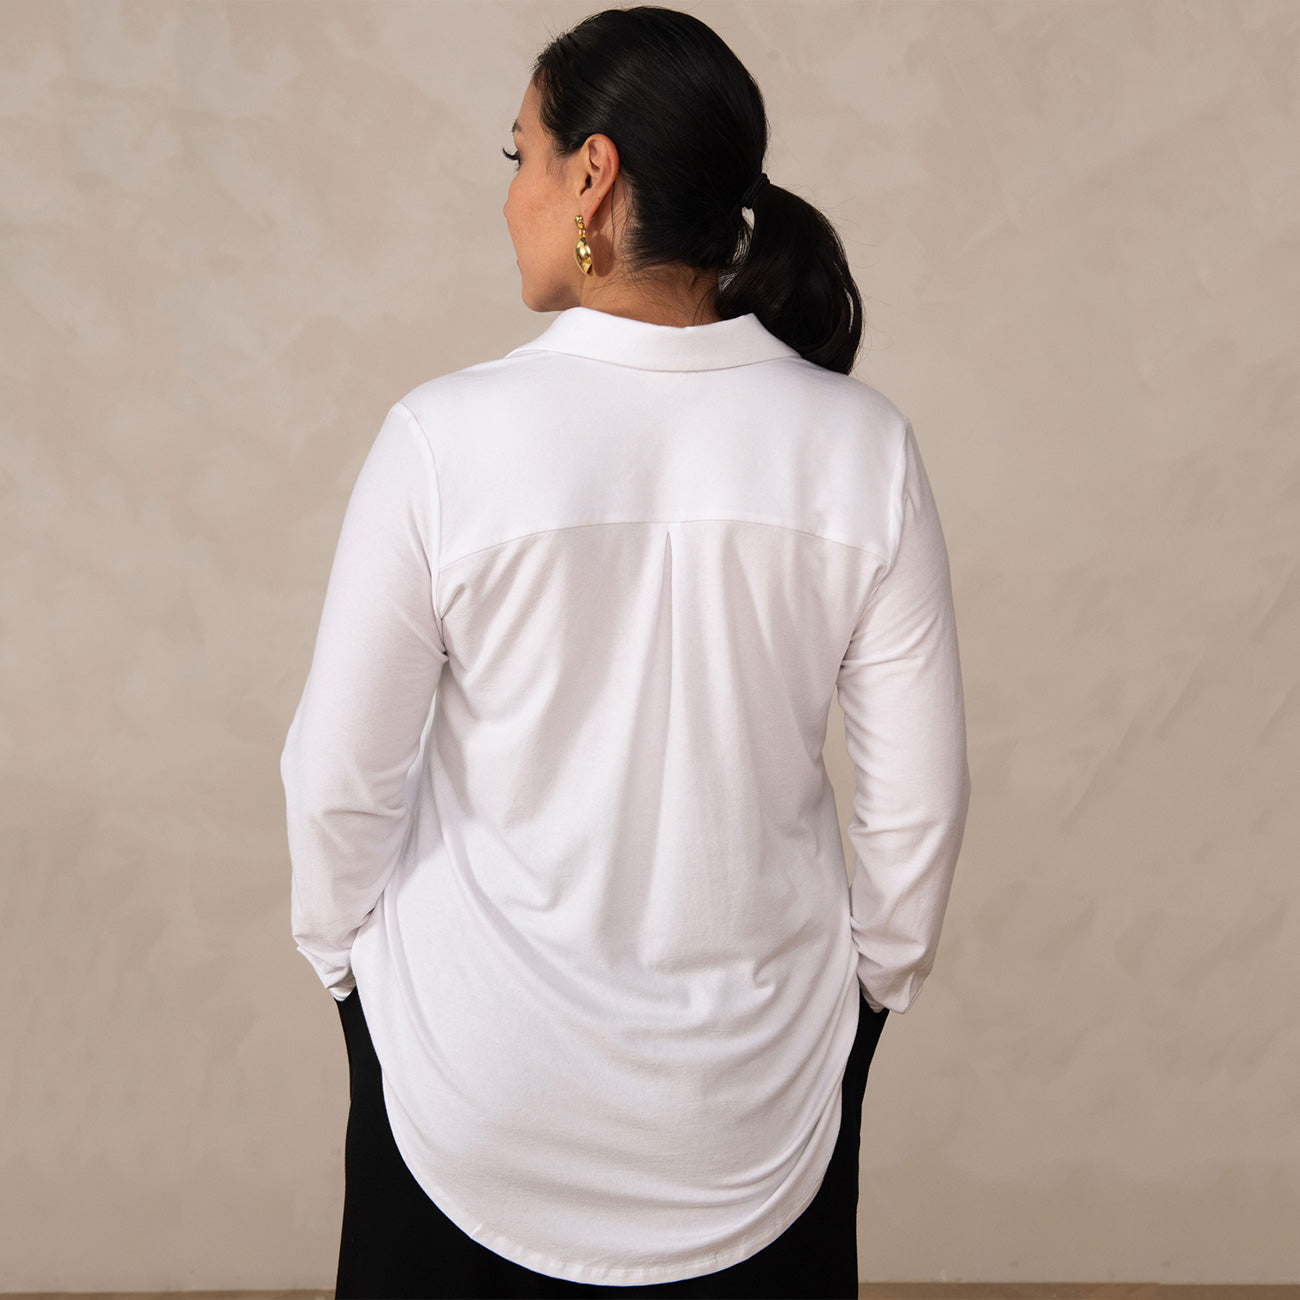 back of a woman wearing a white button-up shirt